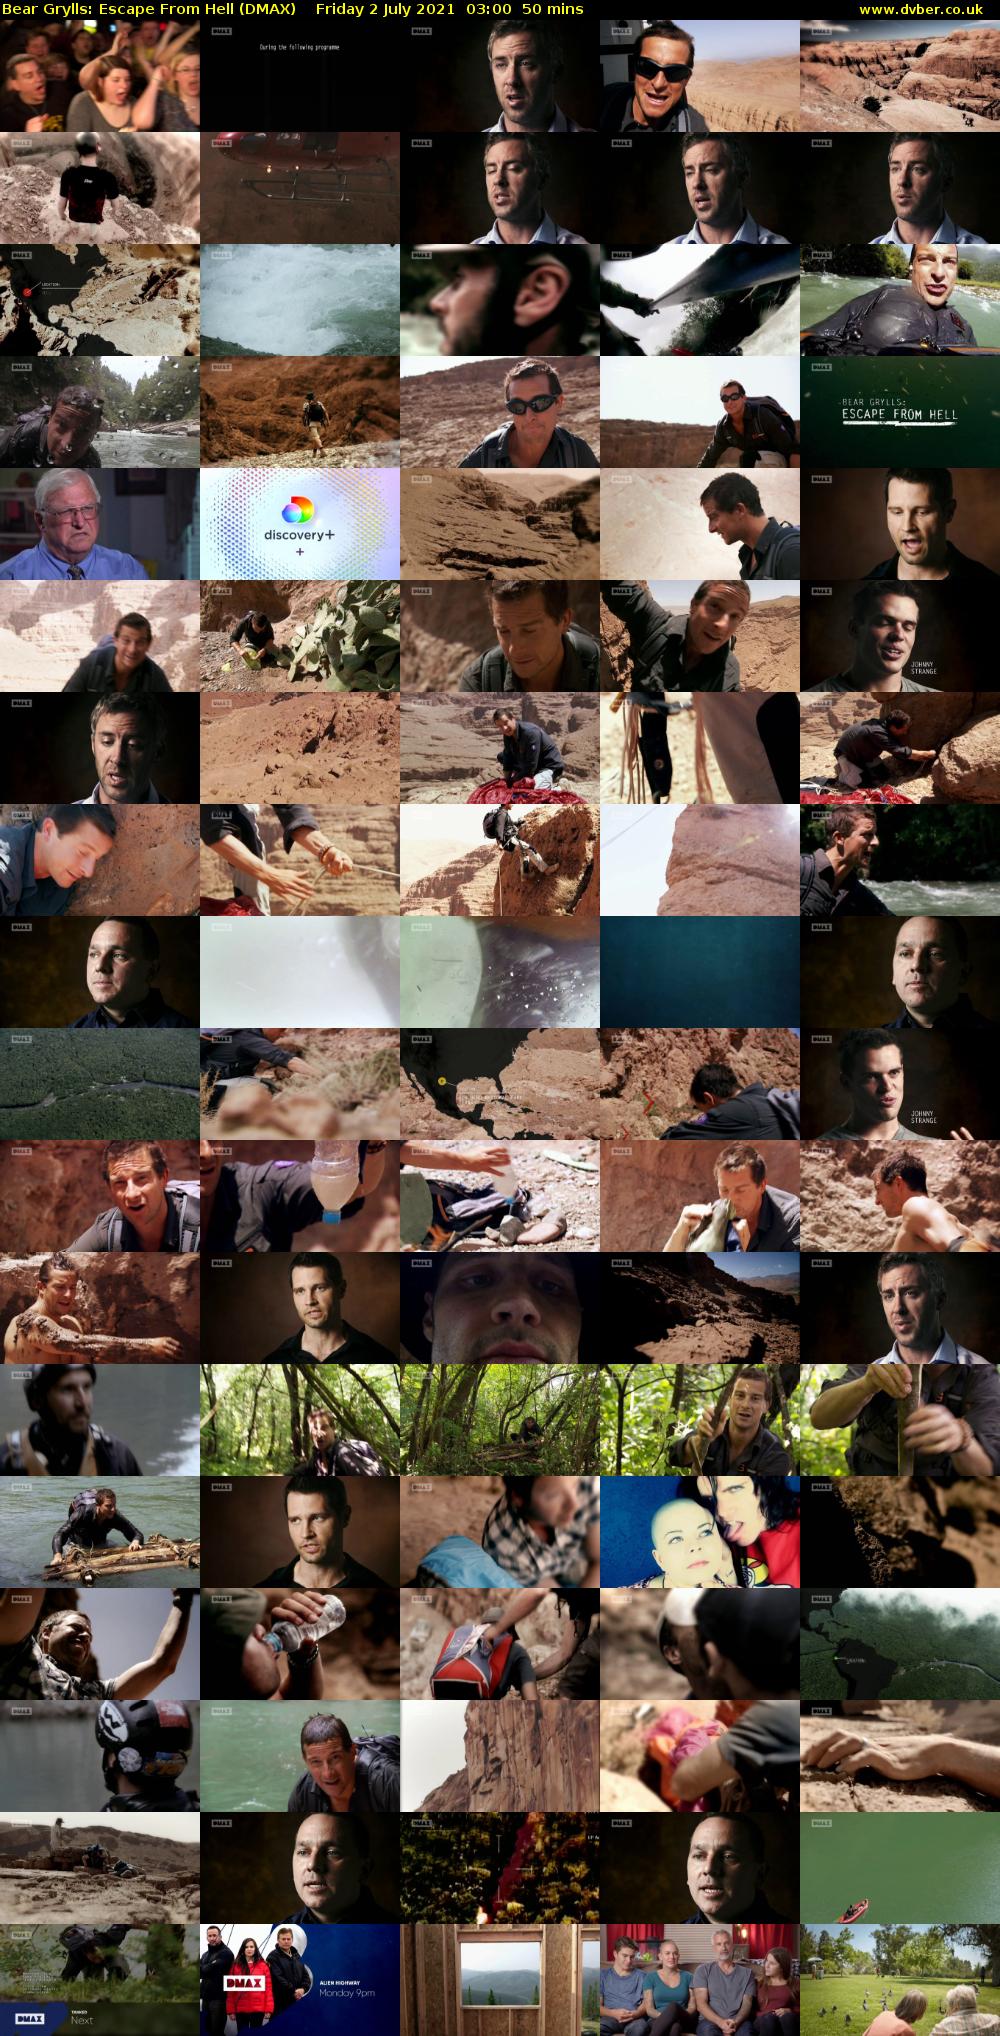 Bear Grylls: Escape From Hell (DMAX) Friday 2 July 2021 03:00 - 03:50